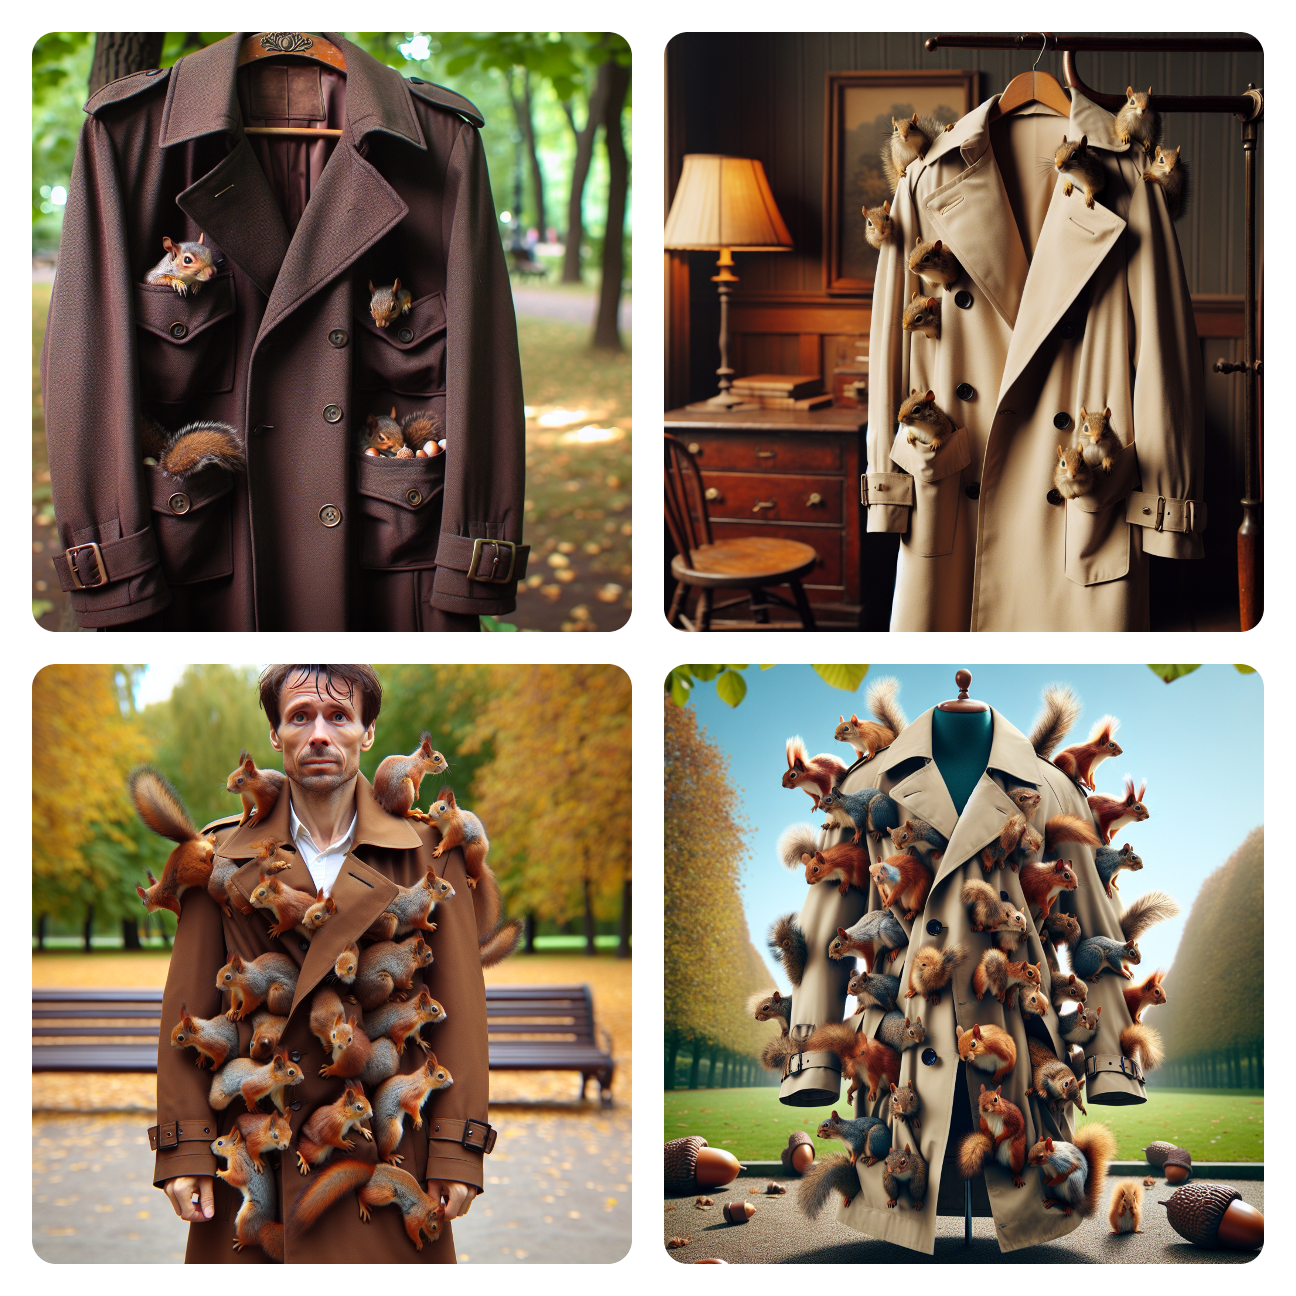 Image: The Nutty Overcoat: Squirrel Overload